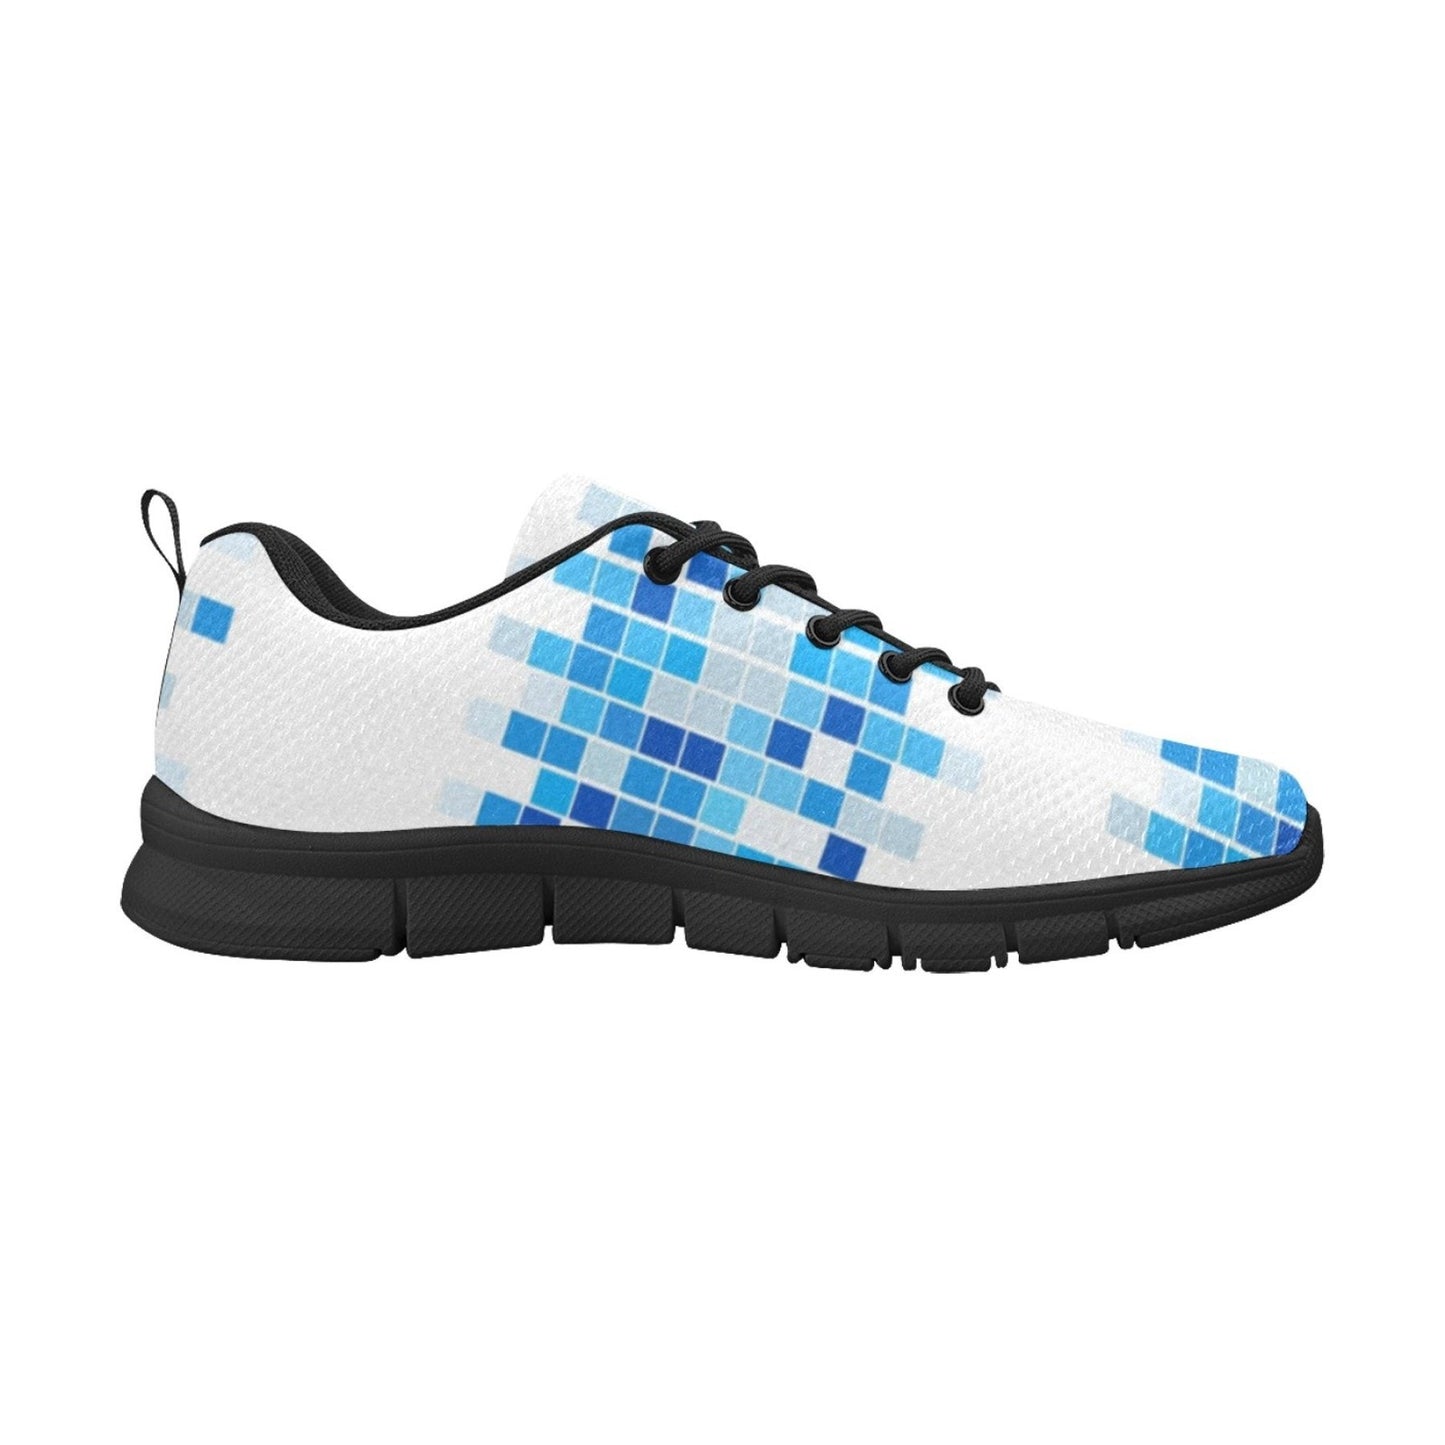 Uniquely You Sneakers for Women, Blue and White Mosaic Print - Running